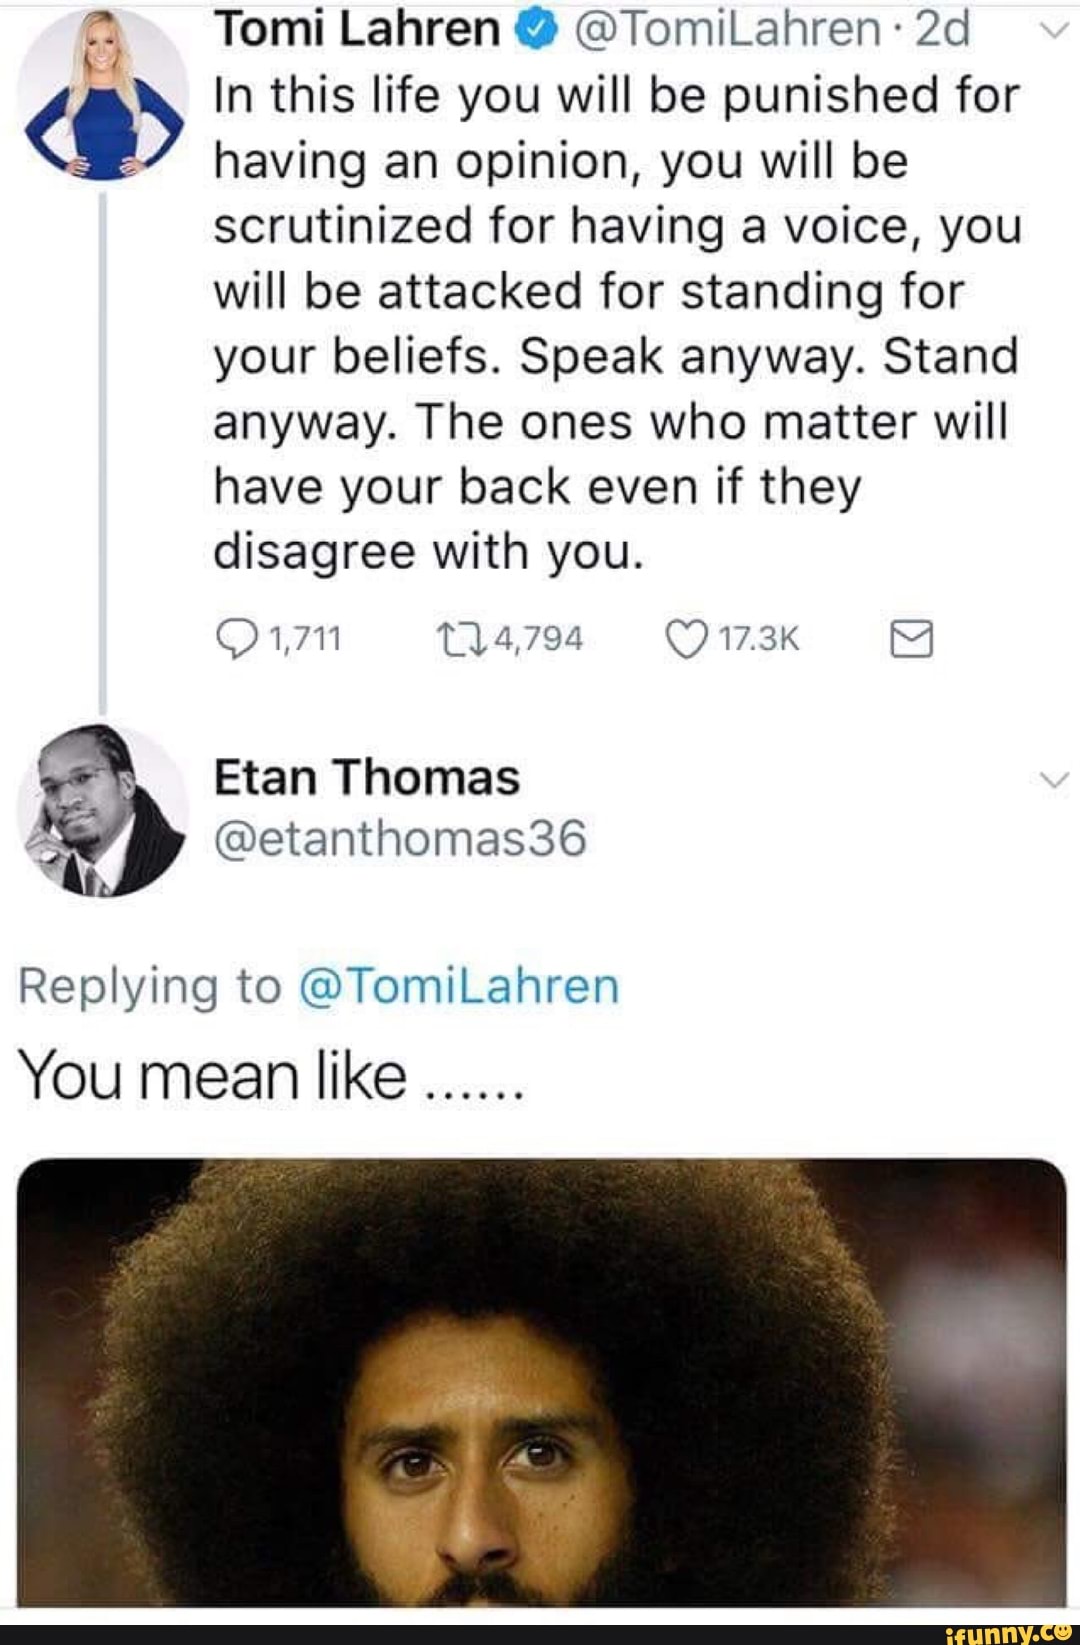 E Replying To Tomilahren You Mean Like Tomi Lahren O Tomilahren 2d In This Life You